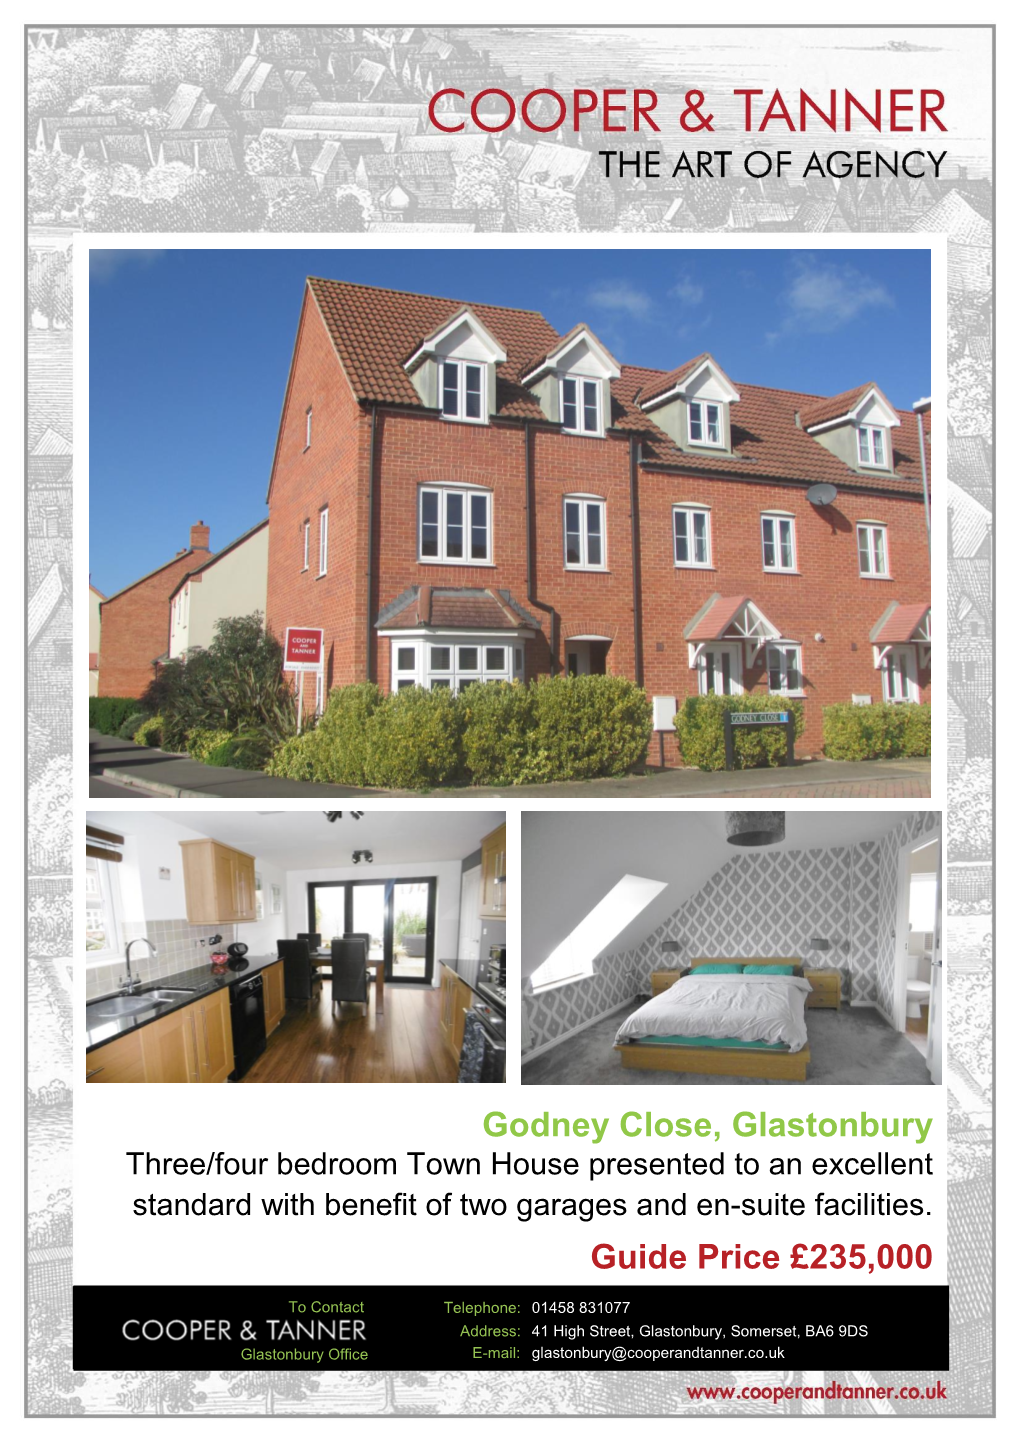 Godney Close, Glastonbury Three/Four Bedroom Town House Presented to an Excellent Standard with Benefit of Two Garages and En-Suite Facilities